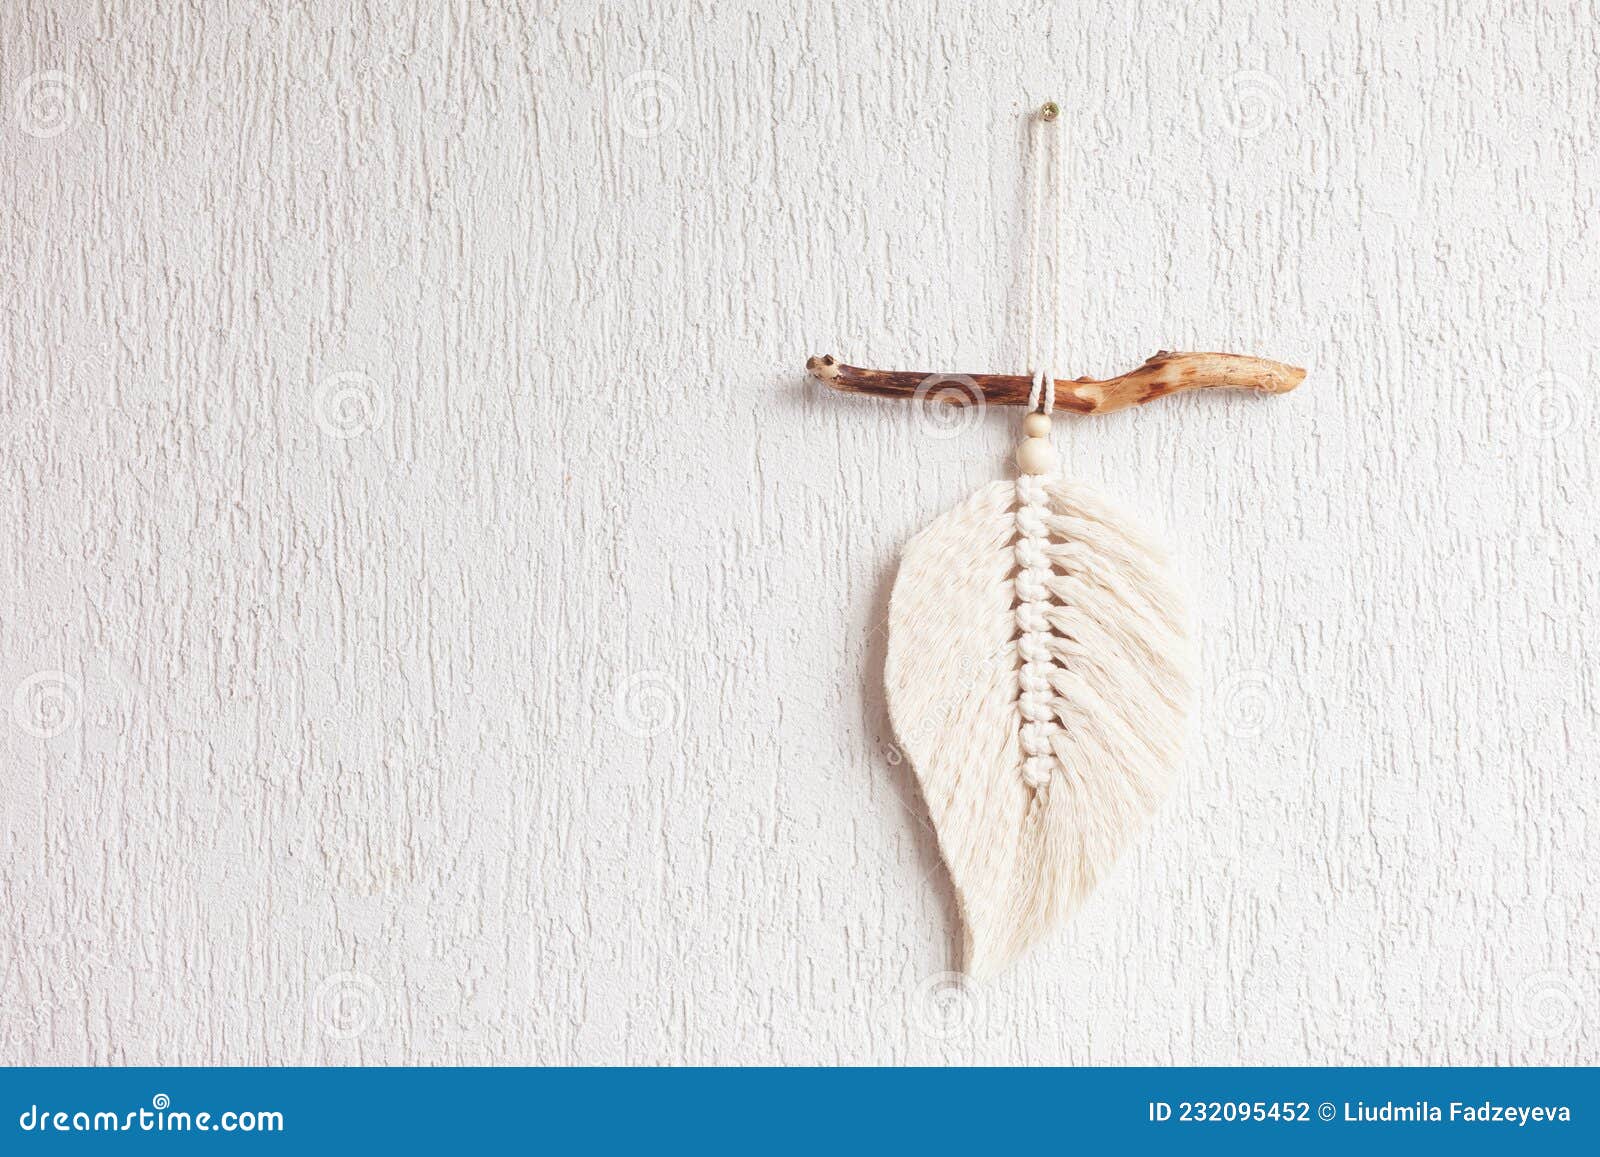 Macrame Leaf in Natural Color on a Wooden Table. Cotton Rope Decor